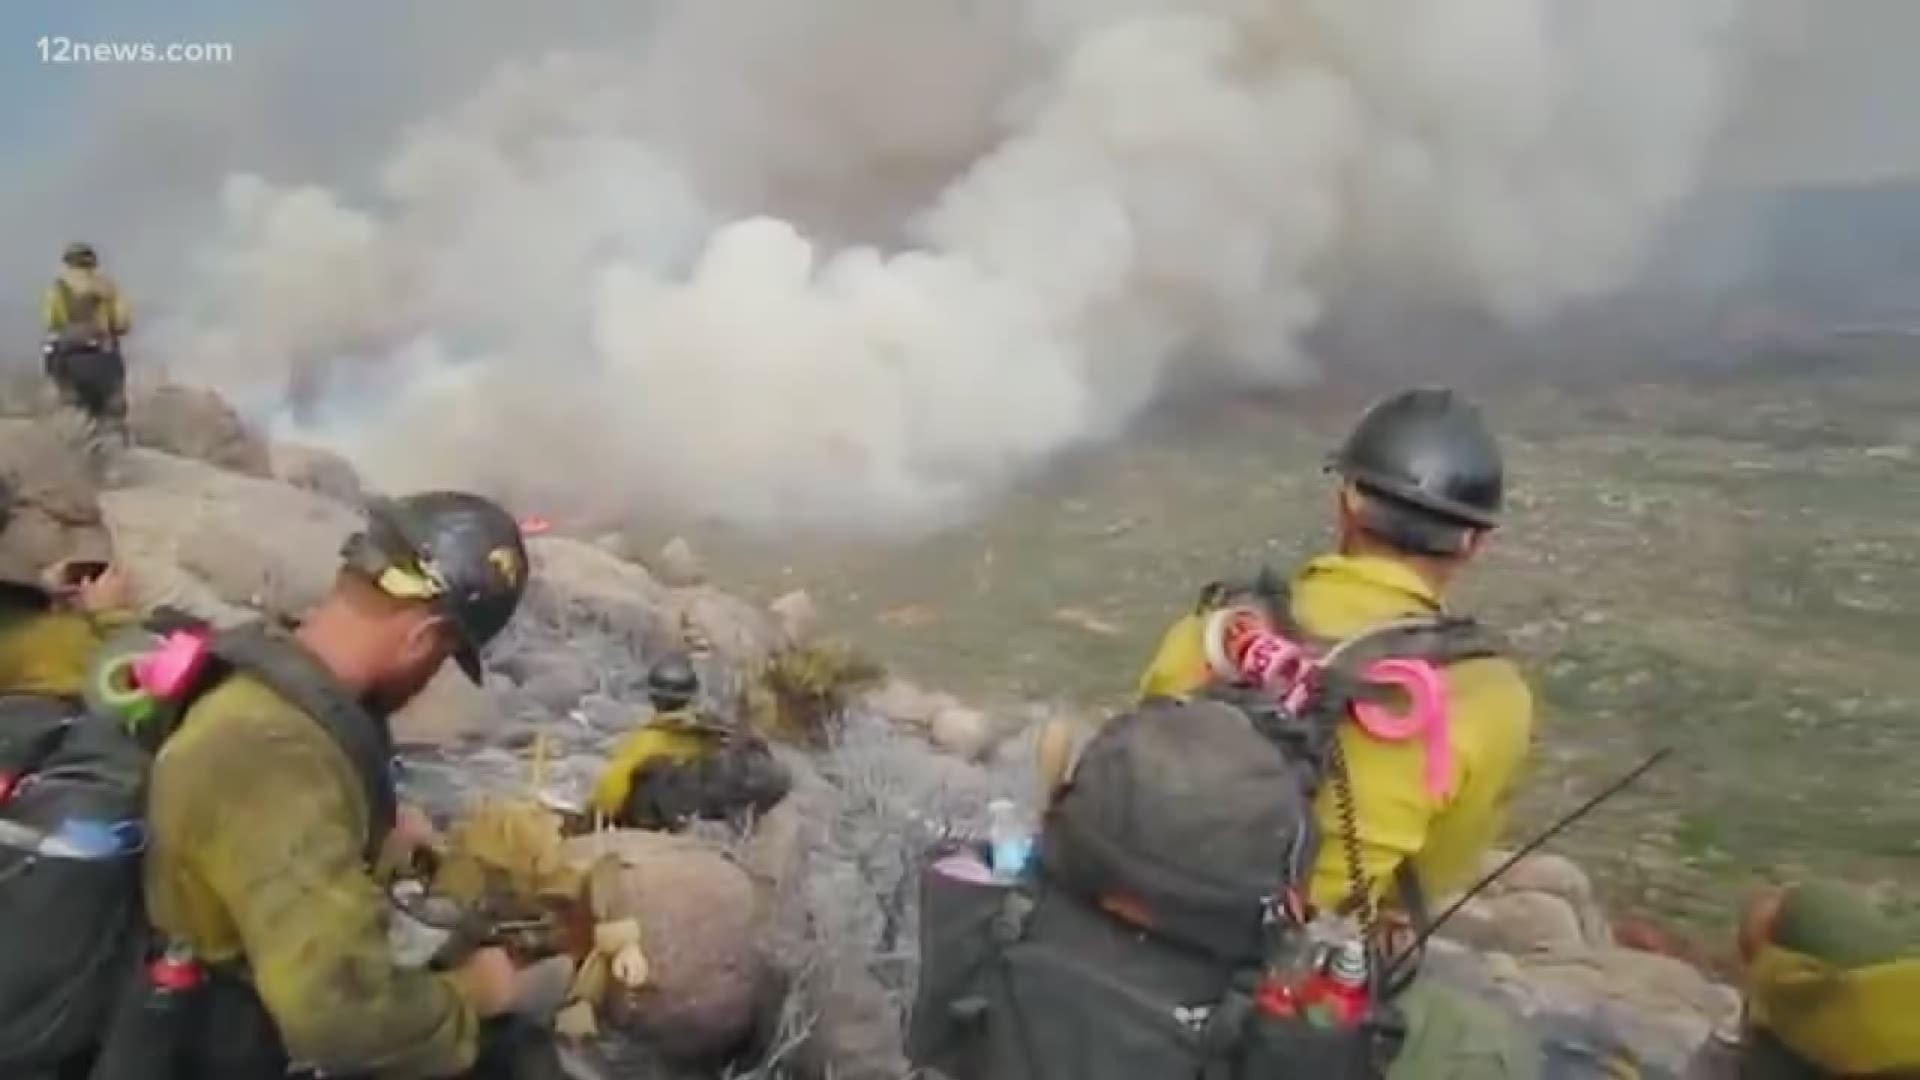 Sunday marked the sixth anniversary of the deaths of 19 Granite Mountain Hotshots, who were killed battling the Yarnell Hill Fire.